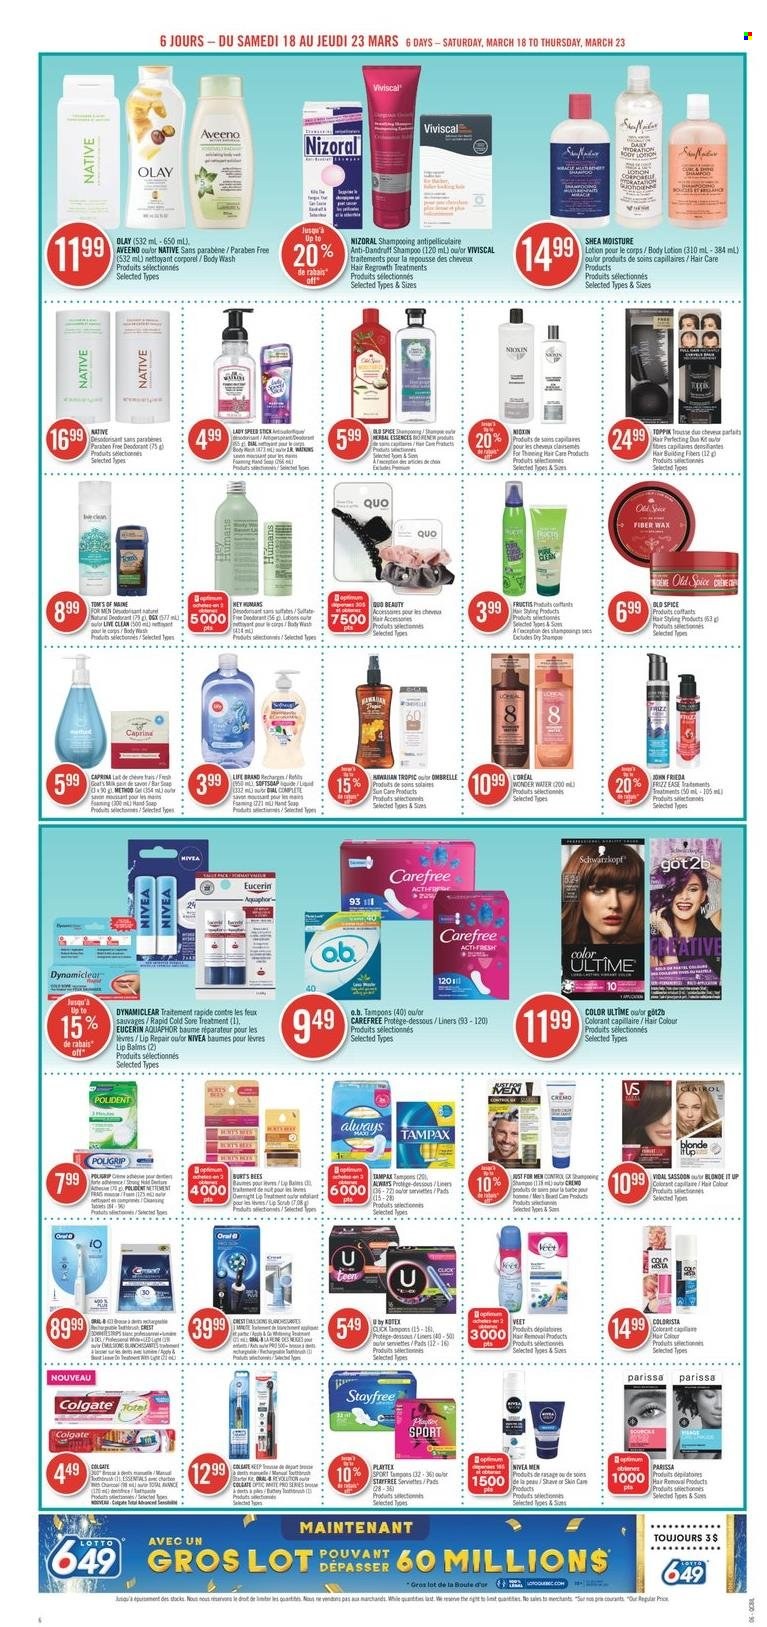 thumbnail - Pharmaprix Flyer - March 18, 2023 - March 23, 2023 - Sales products - Mars, spice, water, Aquaphor, Aveeno, Nivea, body wash, Softsoap, hand soap, soap, Polident, Crest, Stayfree, Carefree, Kotex, tampons, L’Oréal, Olay, hair color, Herbal Essences, John Frieda, Toppik, Fructis, body lotion, anti-perspirant, Speed Stick, Veet, serviettes, Optimum, Lotto, Colgate, Eucerin, shampoo, Tampax, Old Spice, Schwarzkopf, deodorant. Page 7.